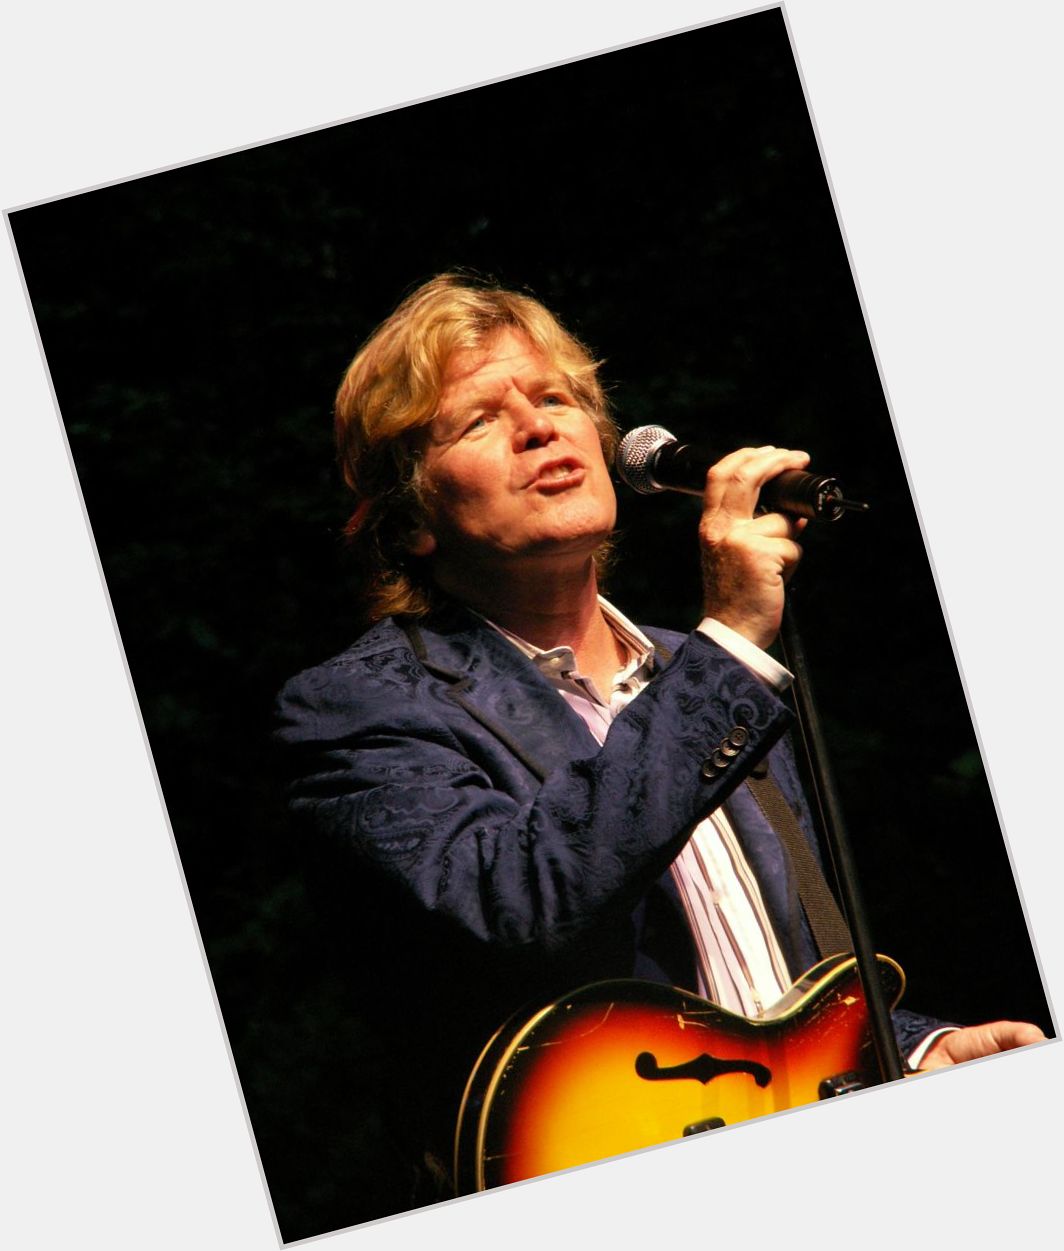 Please join us here at in wishing the one and only Peter Noone a very Happy 73rd Birthday today  